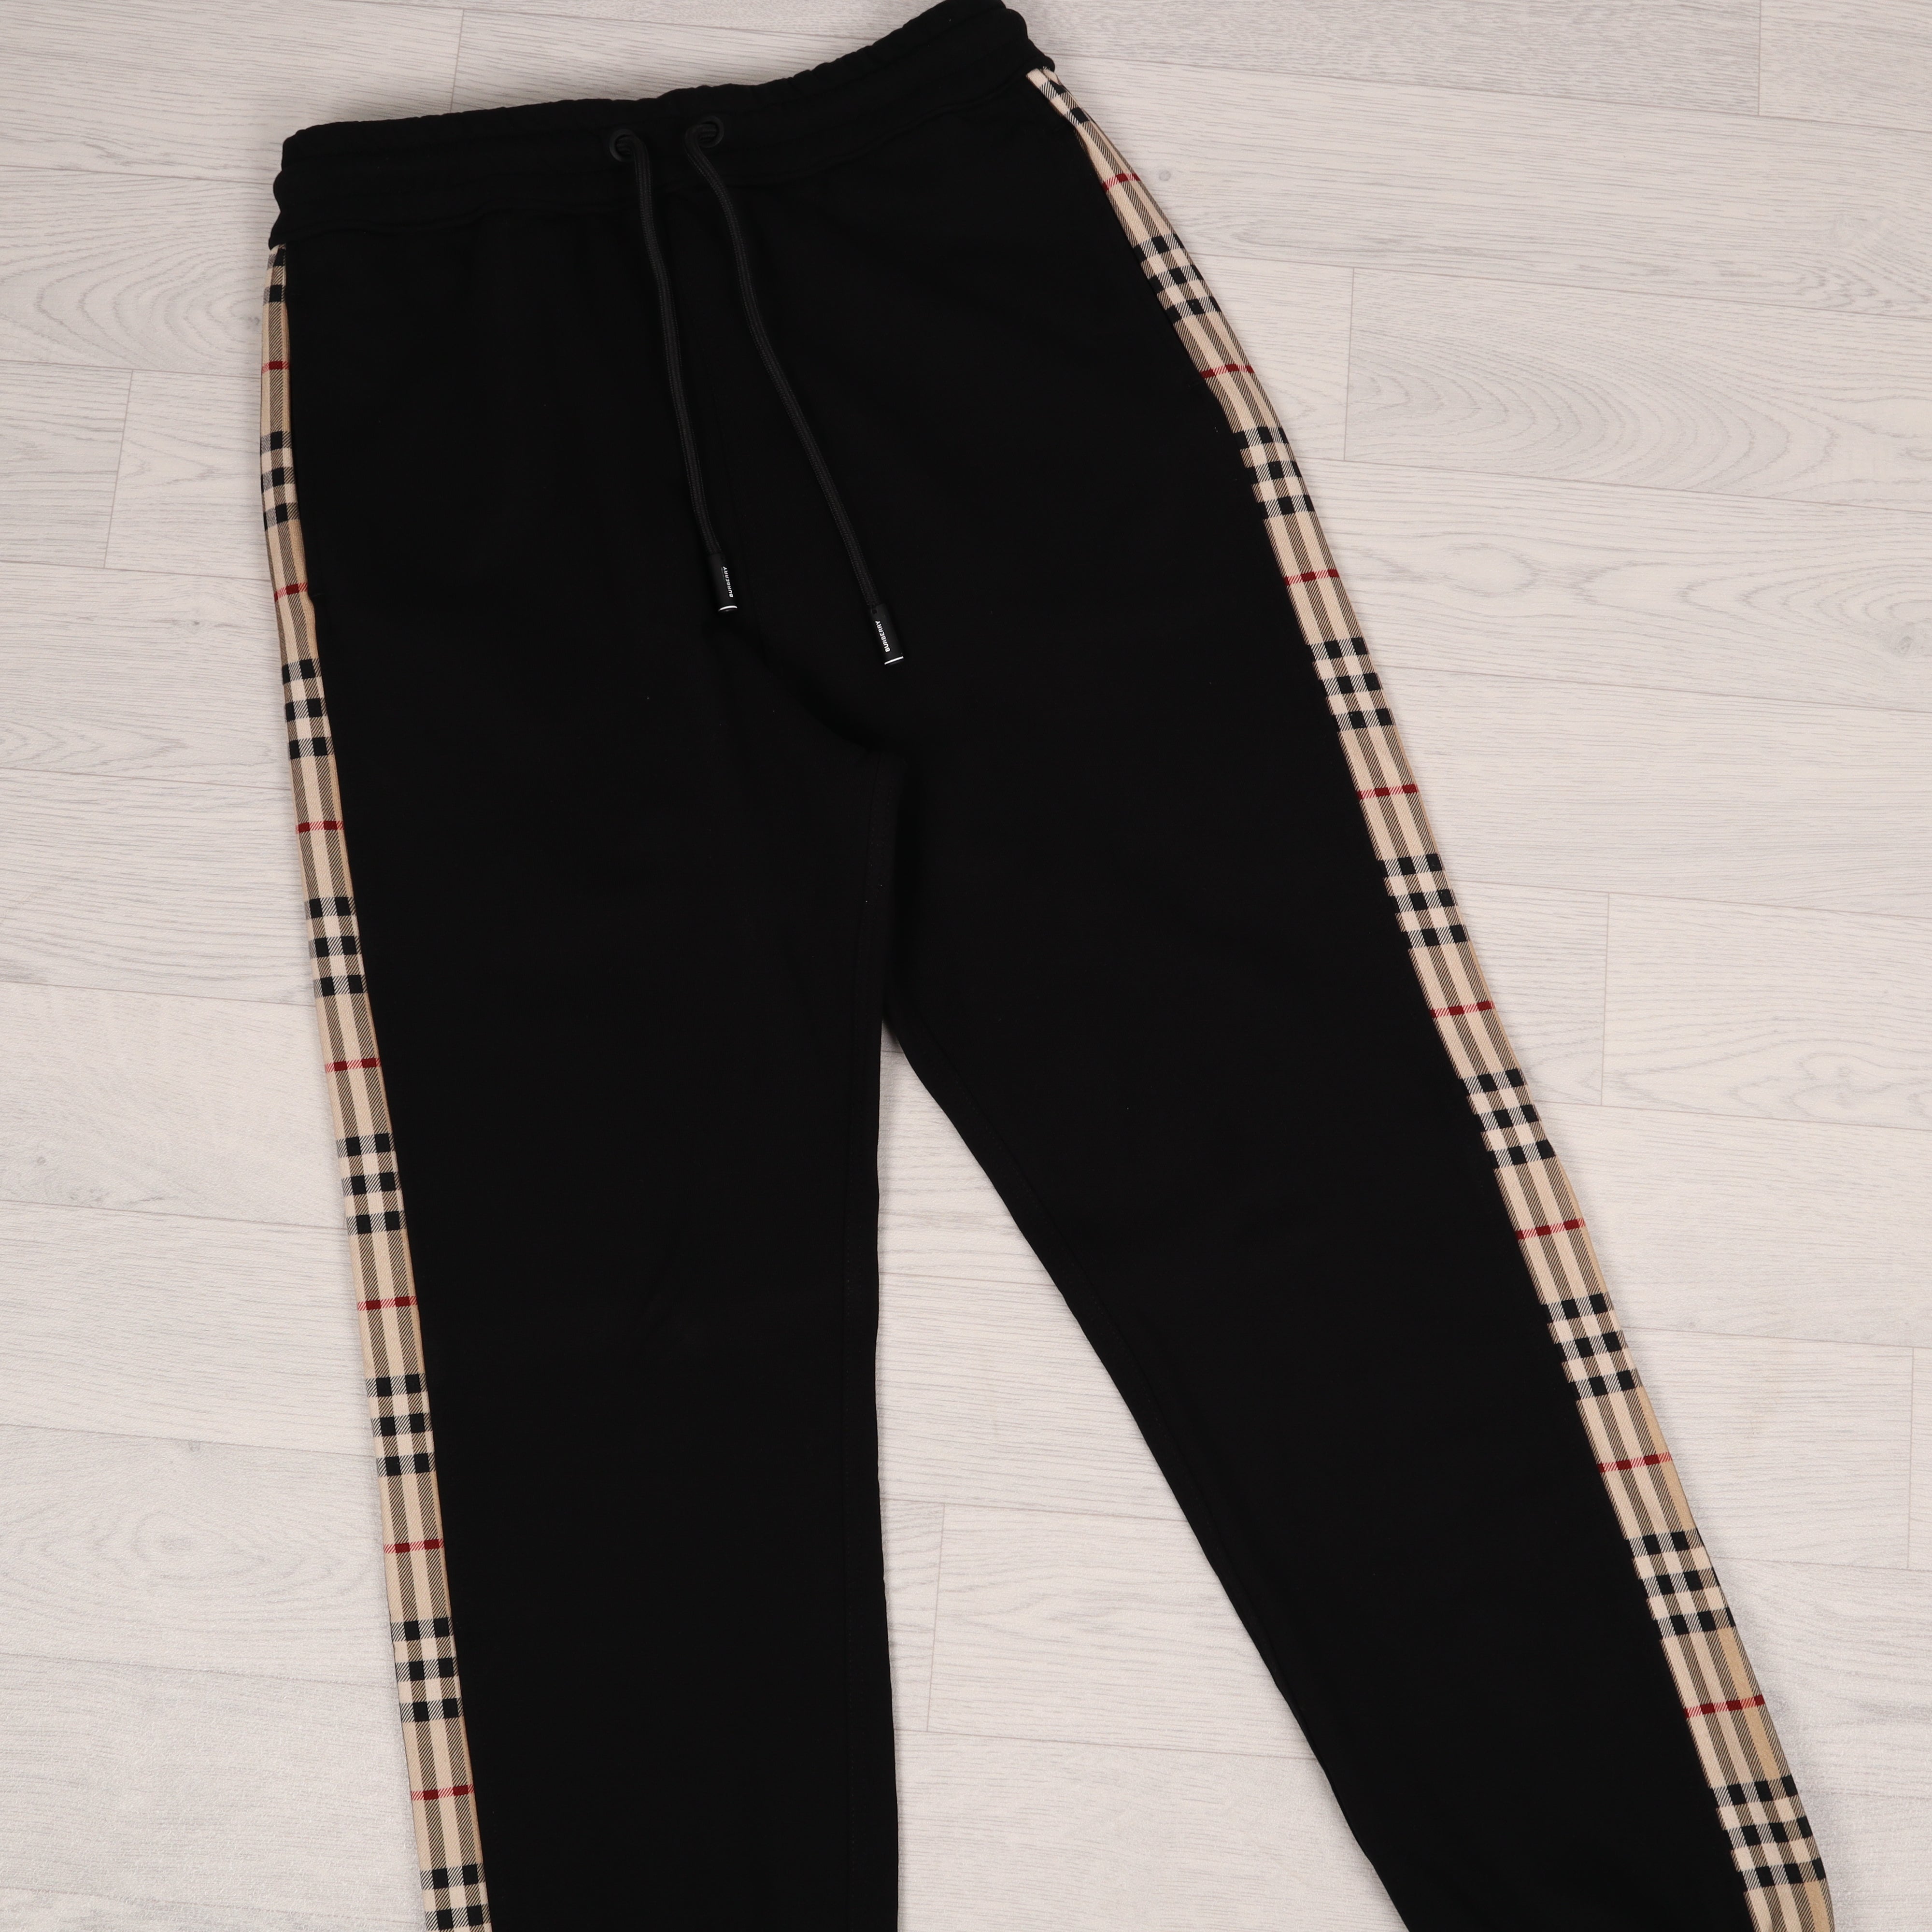 Black Chequered Track Pants.